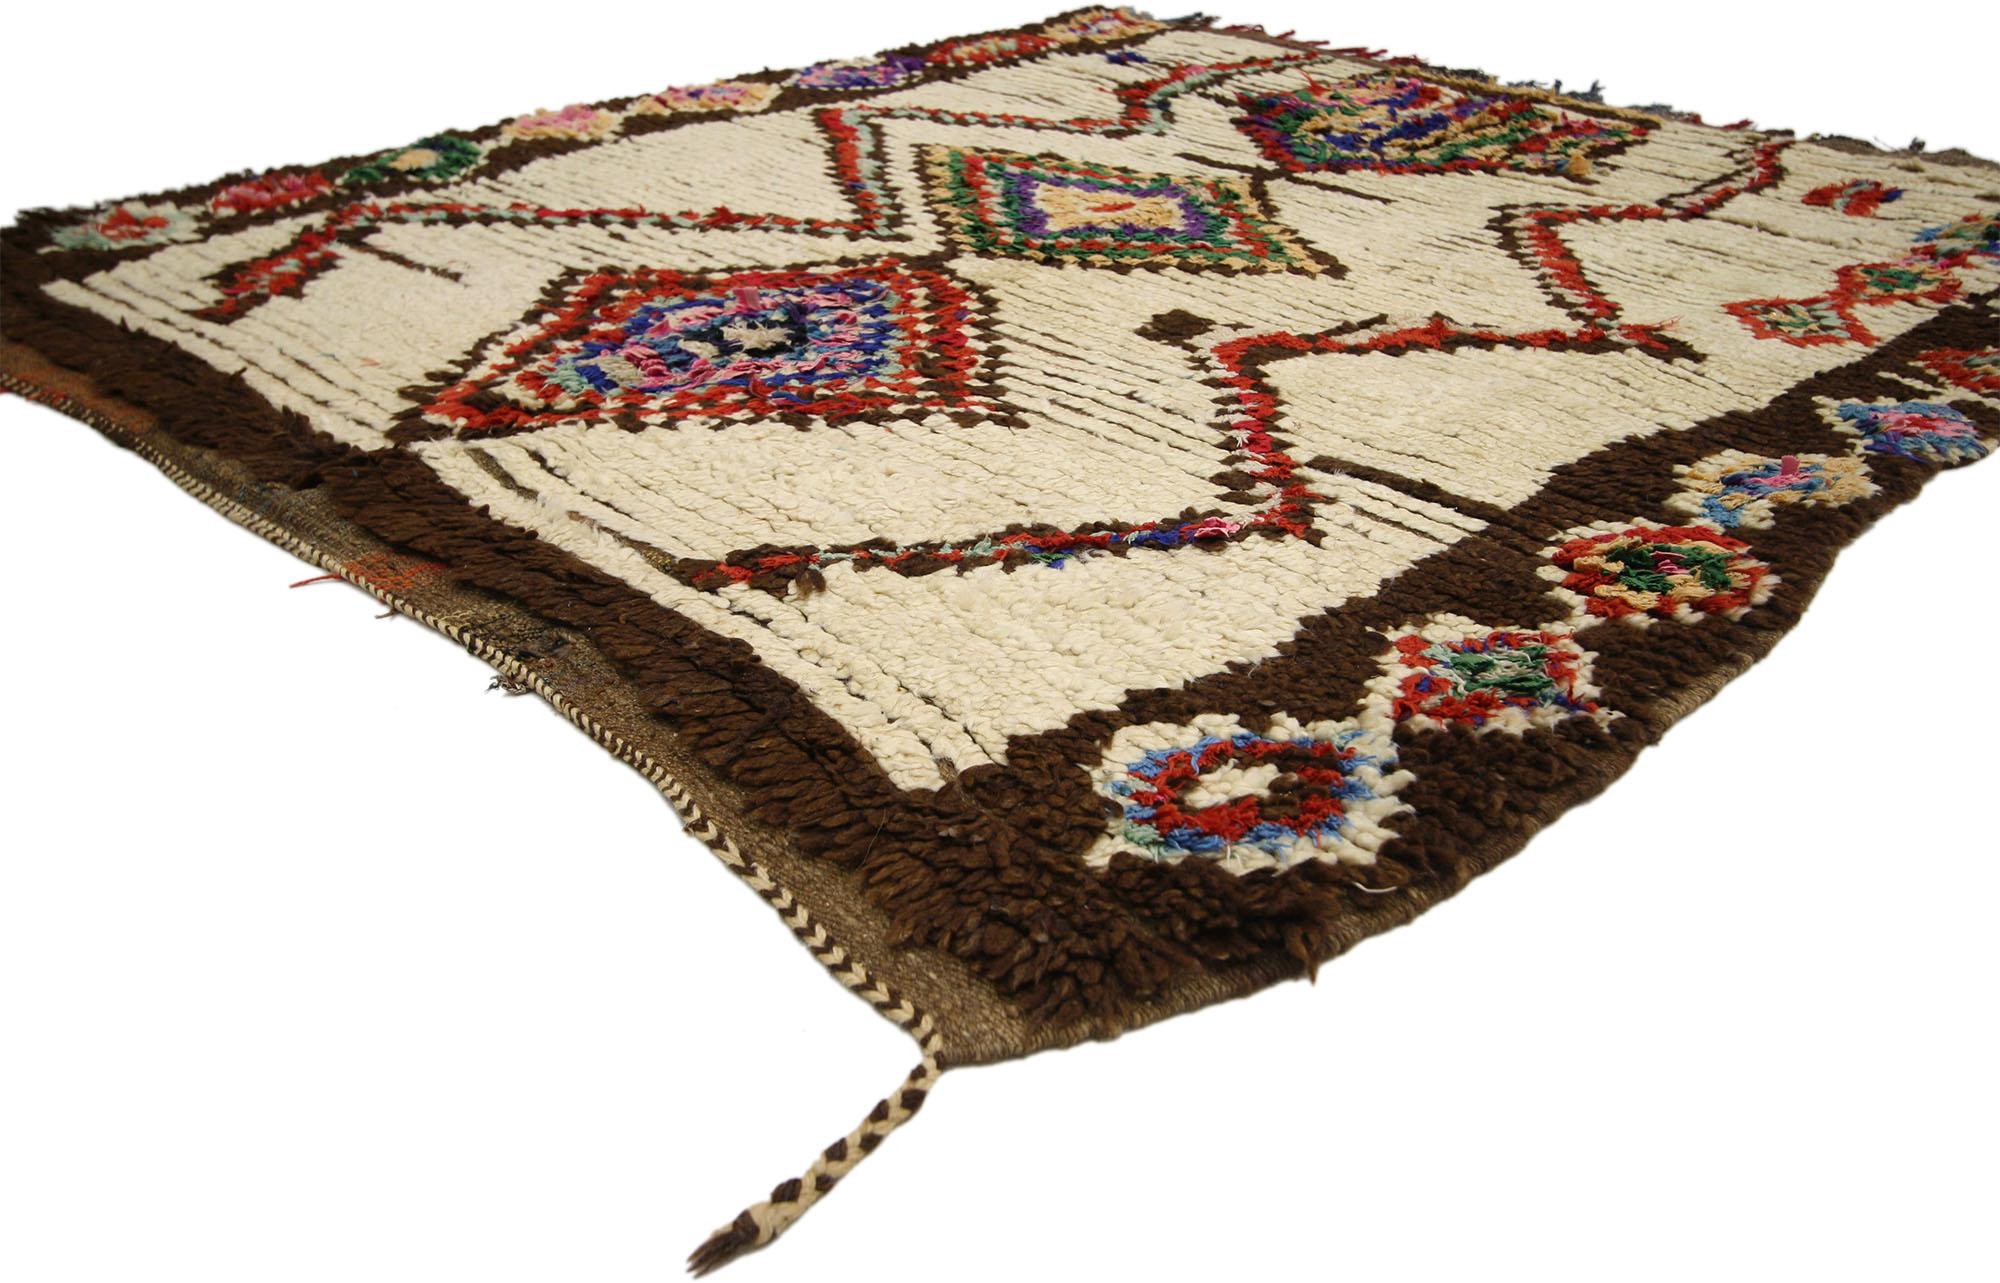 74520 Vintage Boucherouite Moroccan Azilal Rag Rug, 04'09 X 04'11. The tribal style and colorful hues found in this vintage Berber Moroccan Boucherouite rug create a welcoming and relaxed aura surrounding the piece. This vintage Moroccan rug still